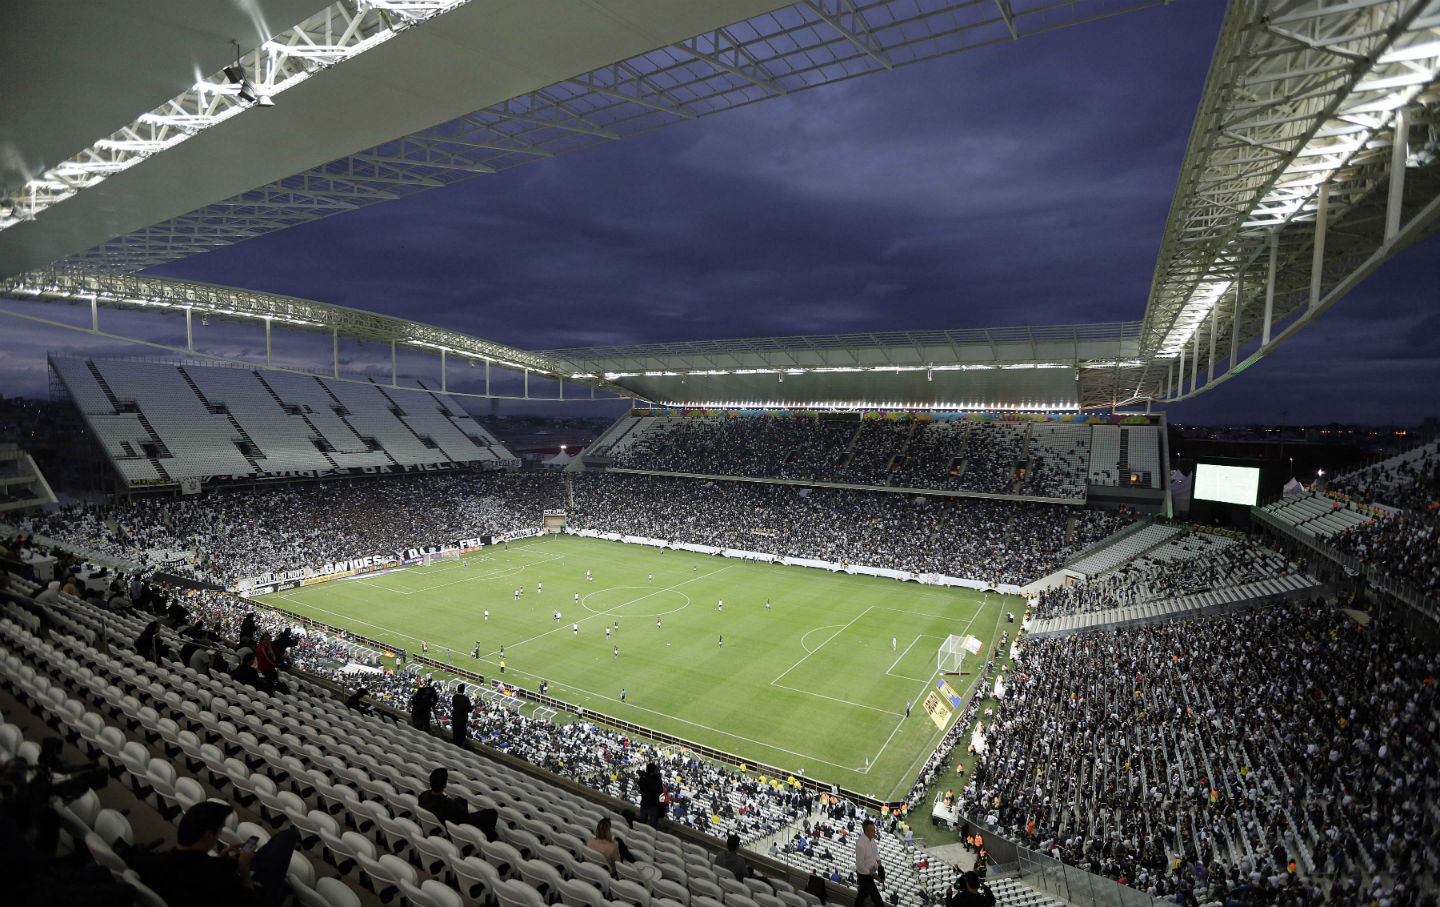 Having a Wedding? A Sweet 16? Consider One of Brazil’s World Cup Stadiums!